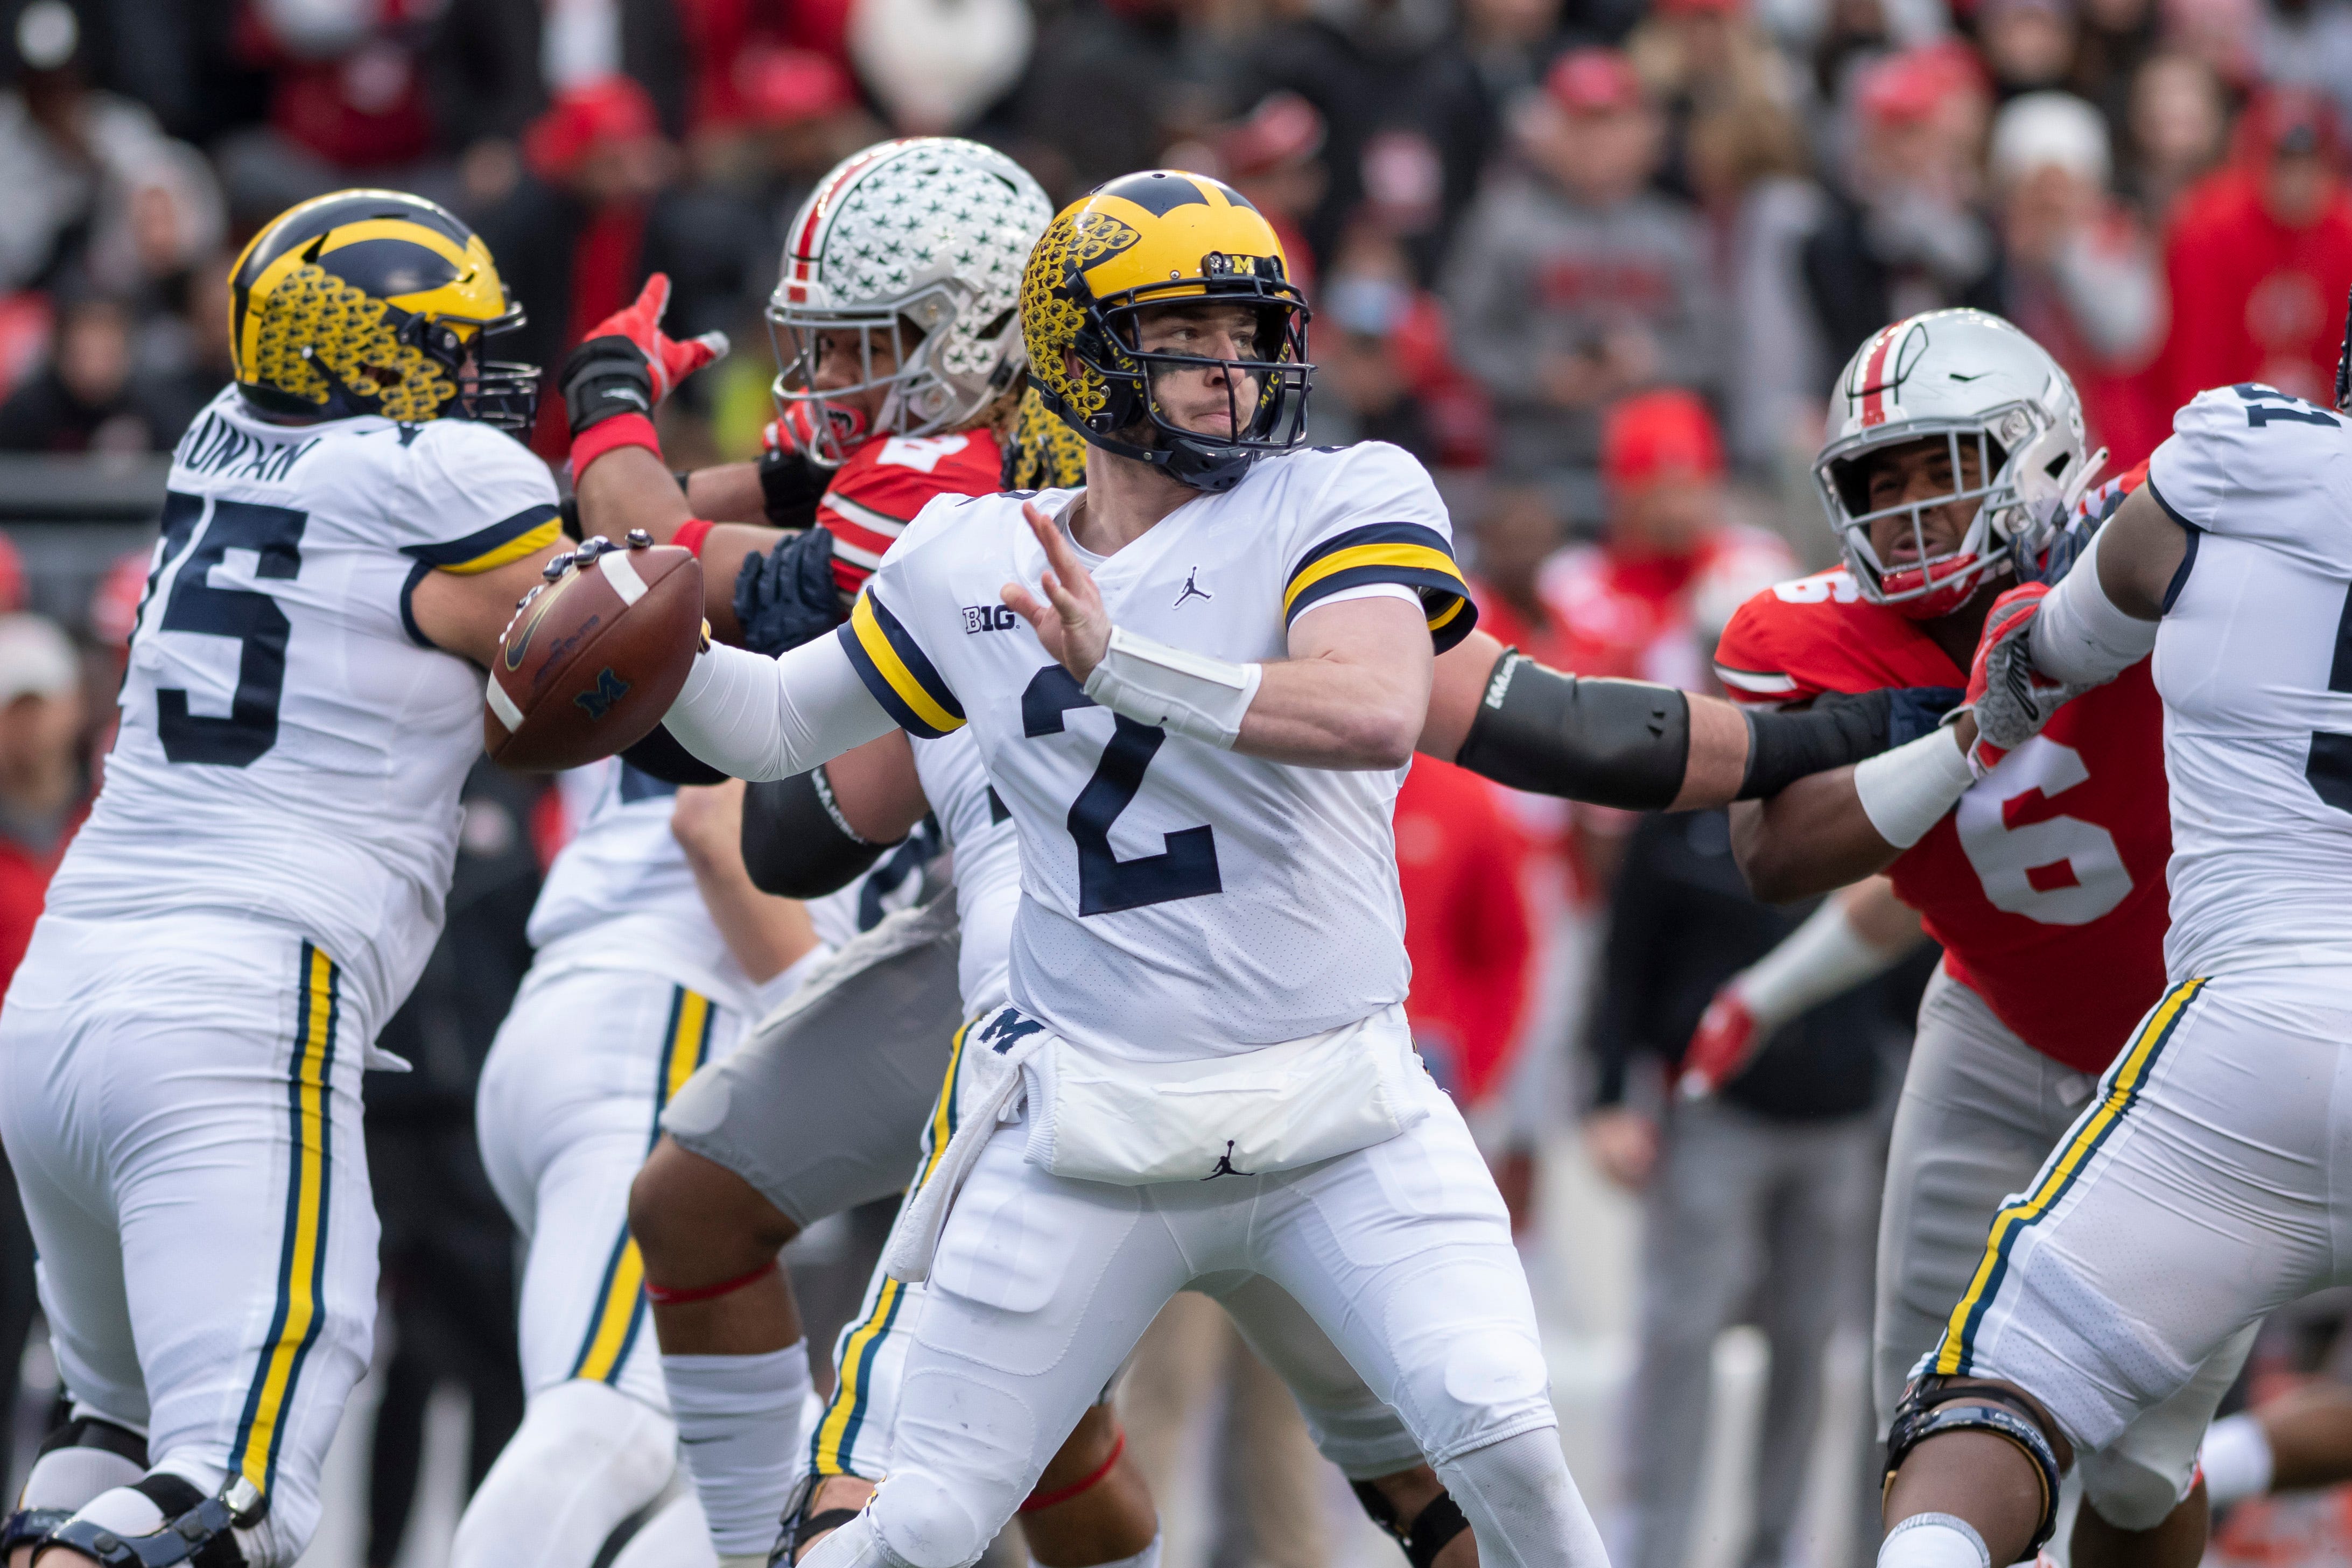 Michigan quarterback Shea Patterson throws a pass in the third quarter against Ohio State.